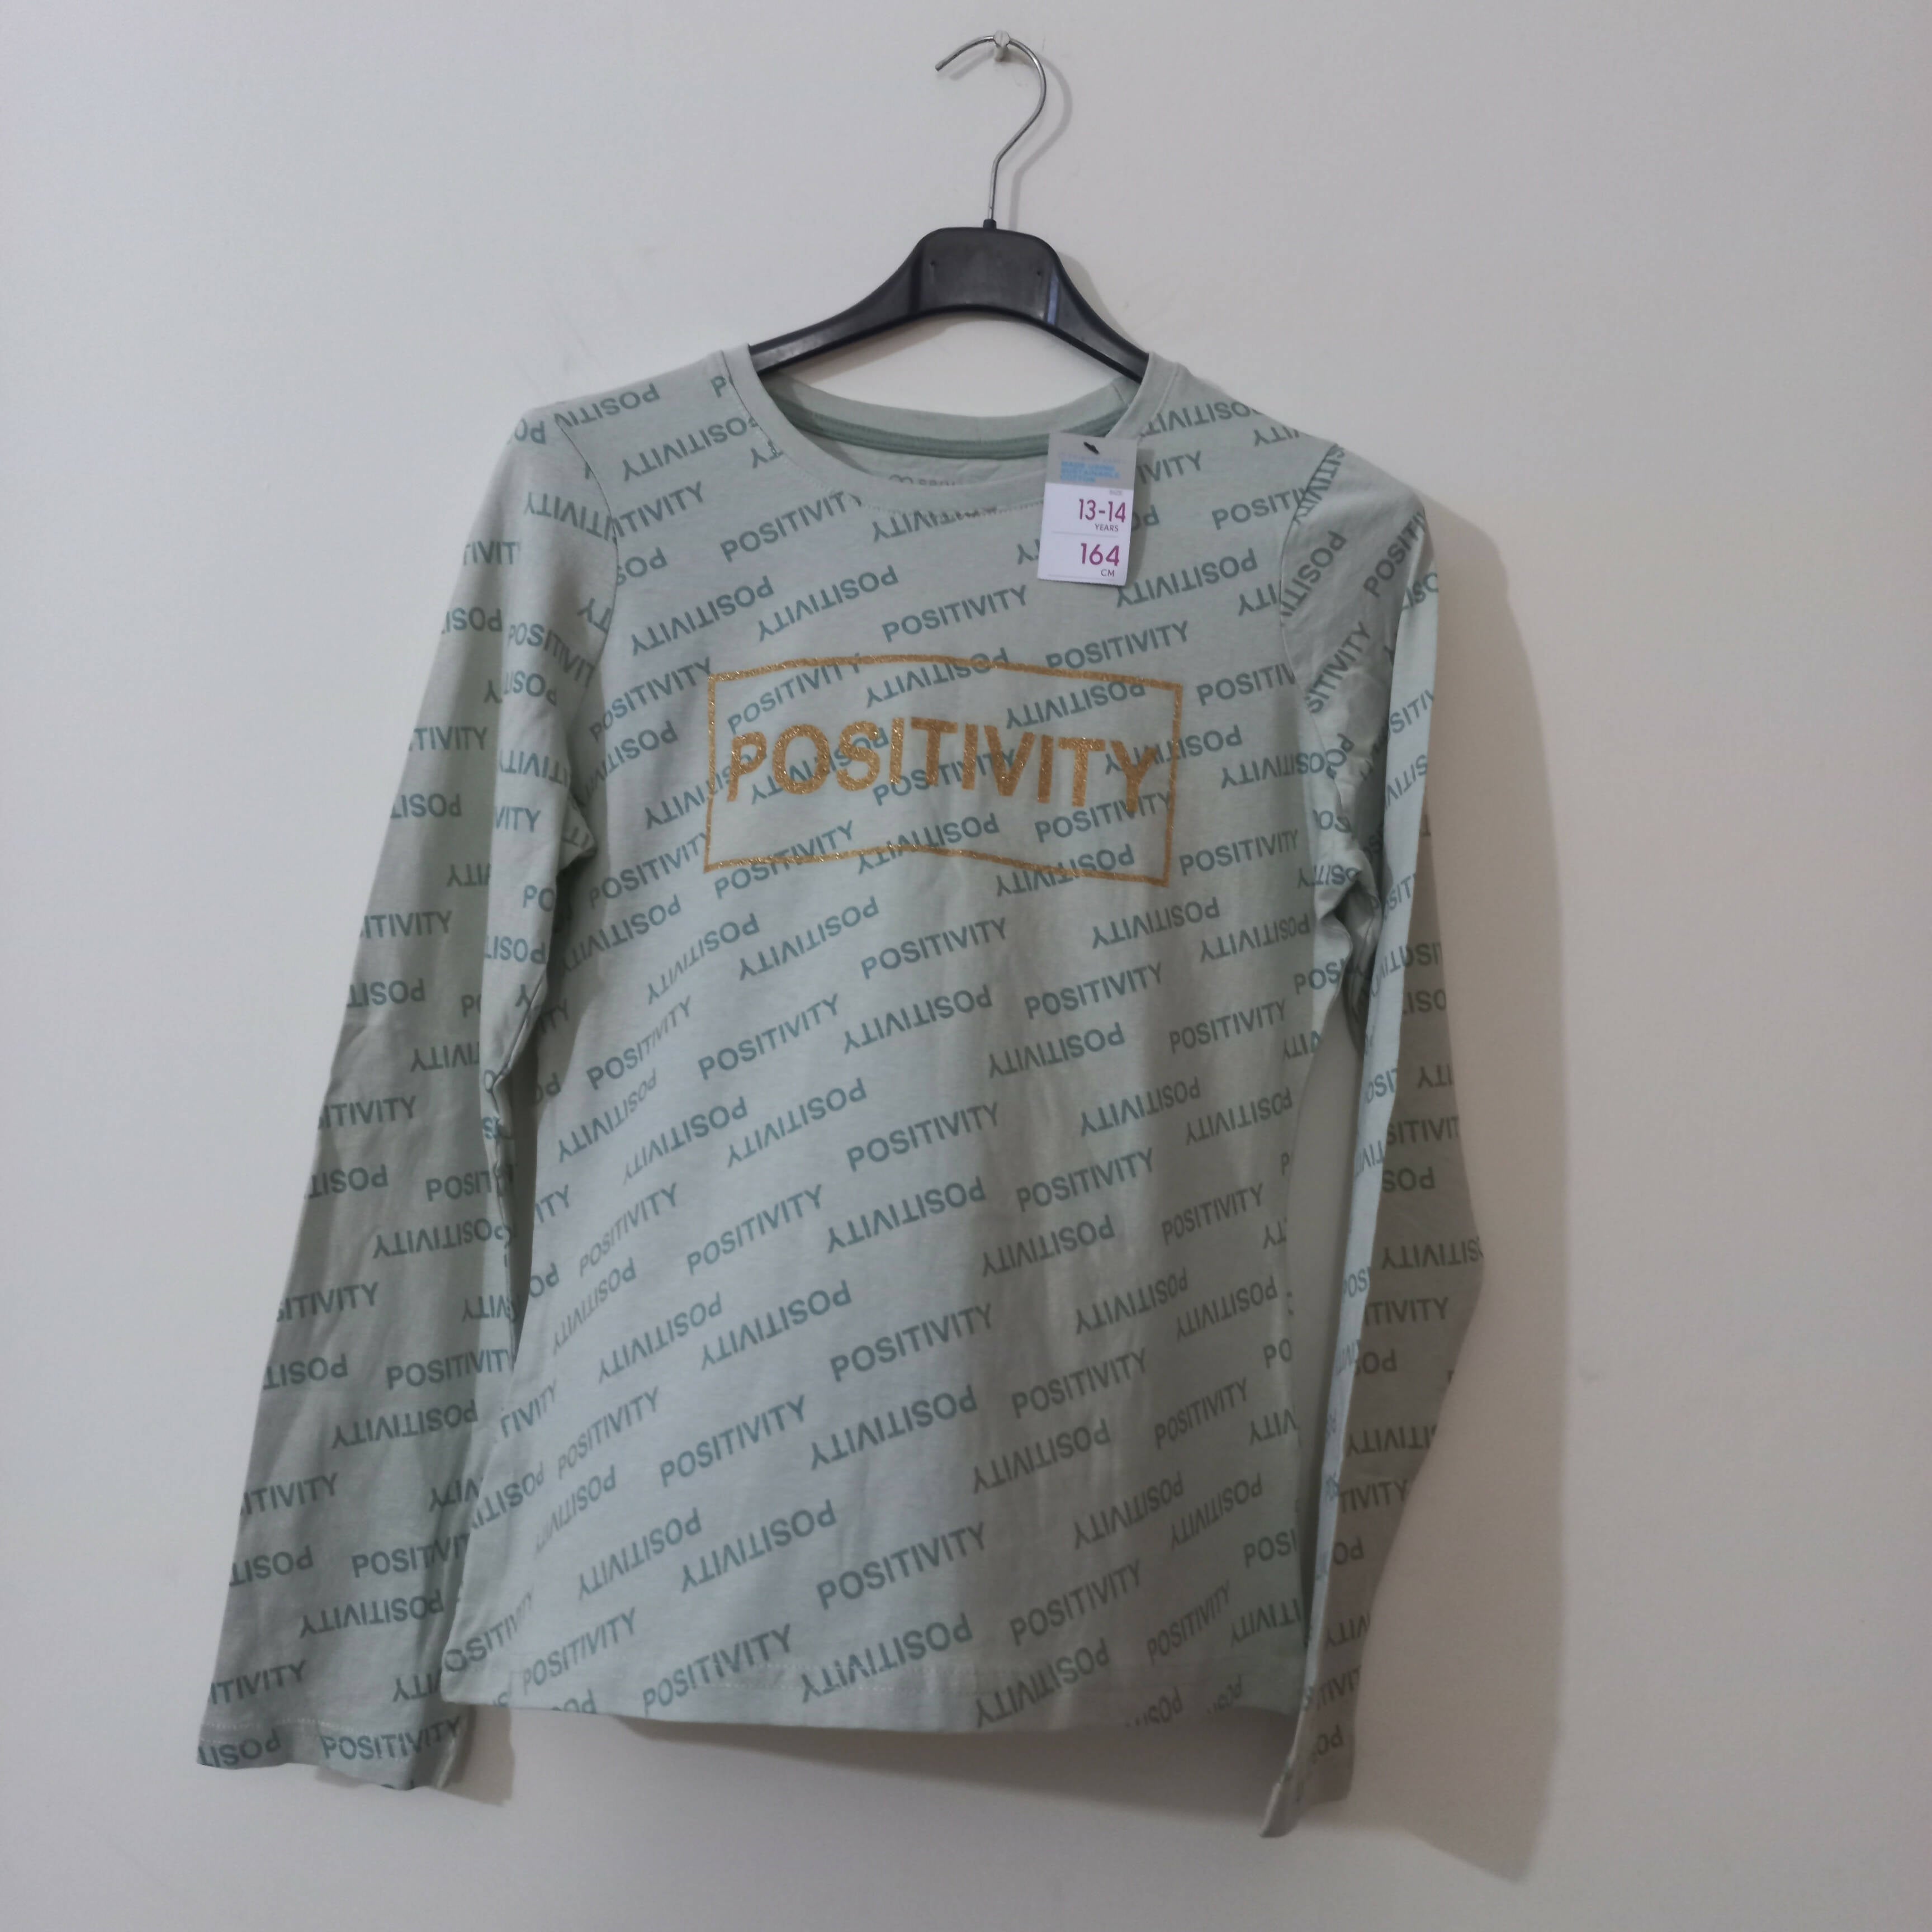 Primark | Positivity T-Shirt | Women Tops & Shirts | Small | Brand New With Tags